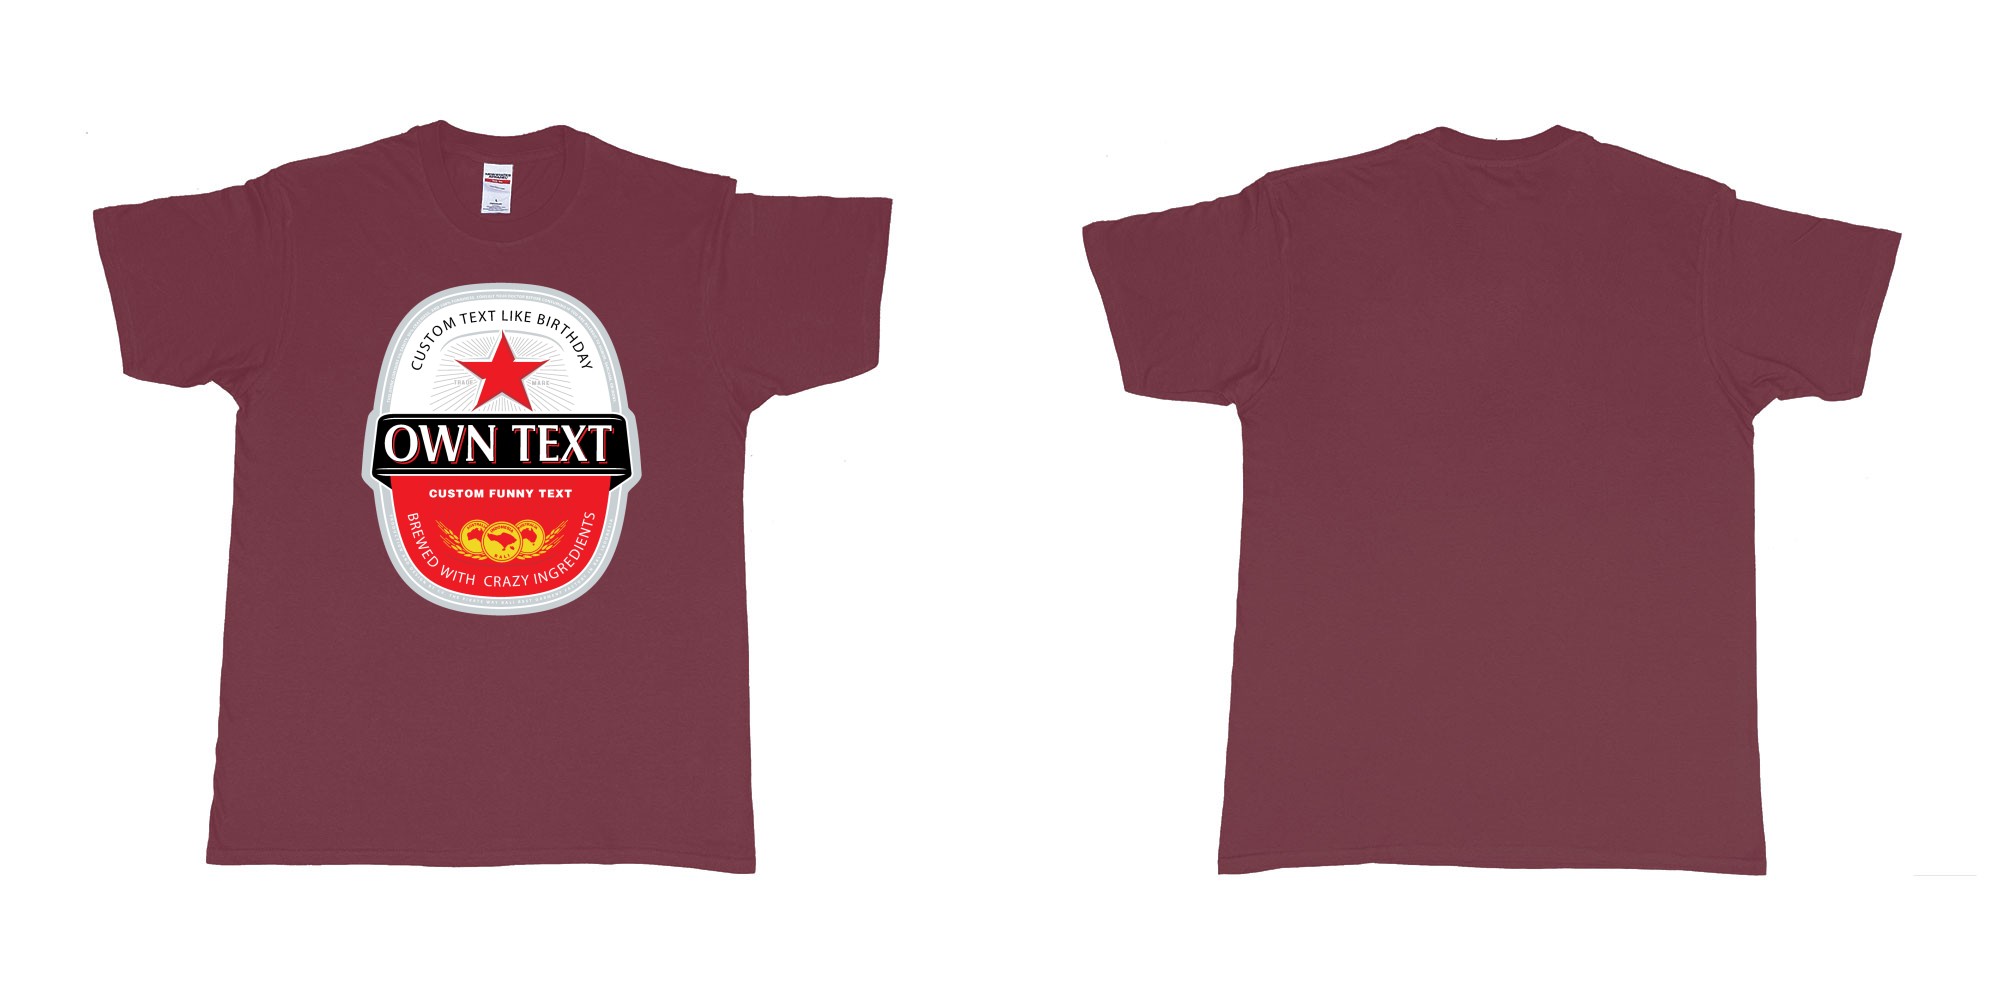 Custom tshirt design beer bintang large label in fabric color marron choice your own text made in Bali by The Pirate Way